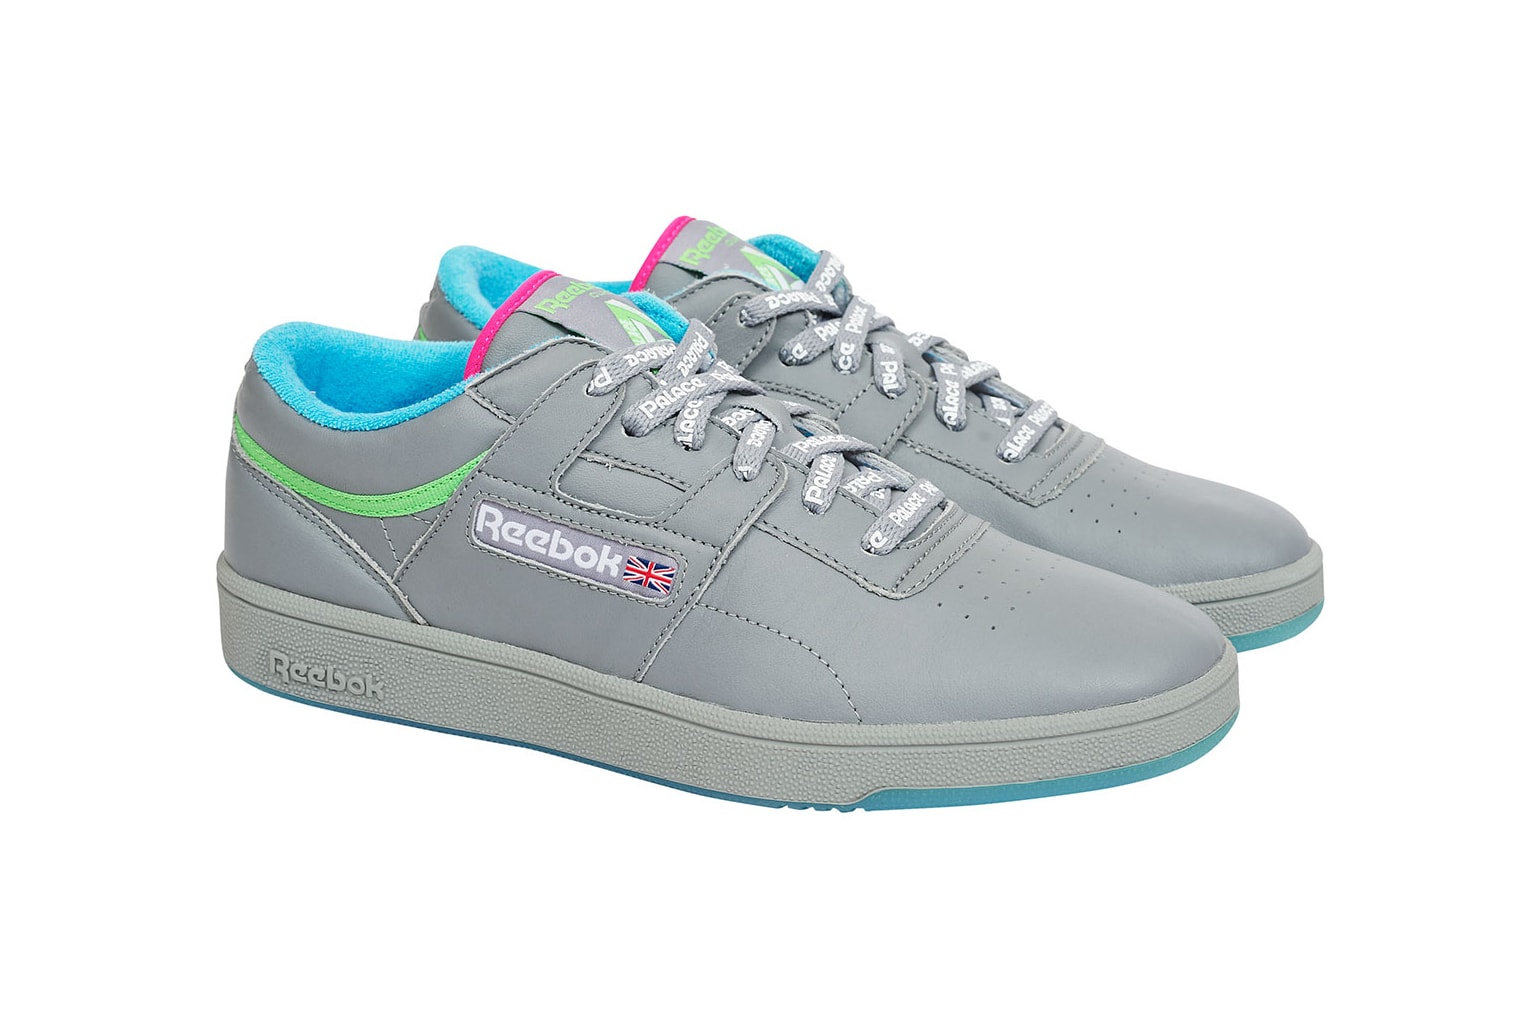 Palace x Reebok Workout Collaboration Grey Colorway Black Colorway White Colorway Spring 2018 Drop